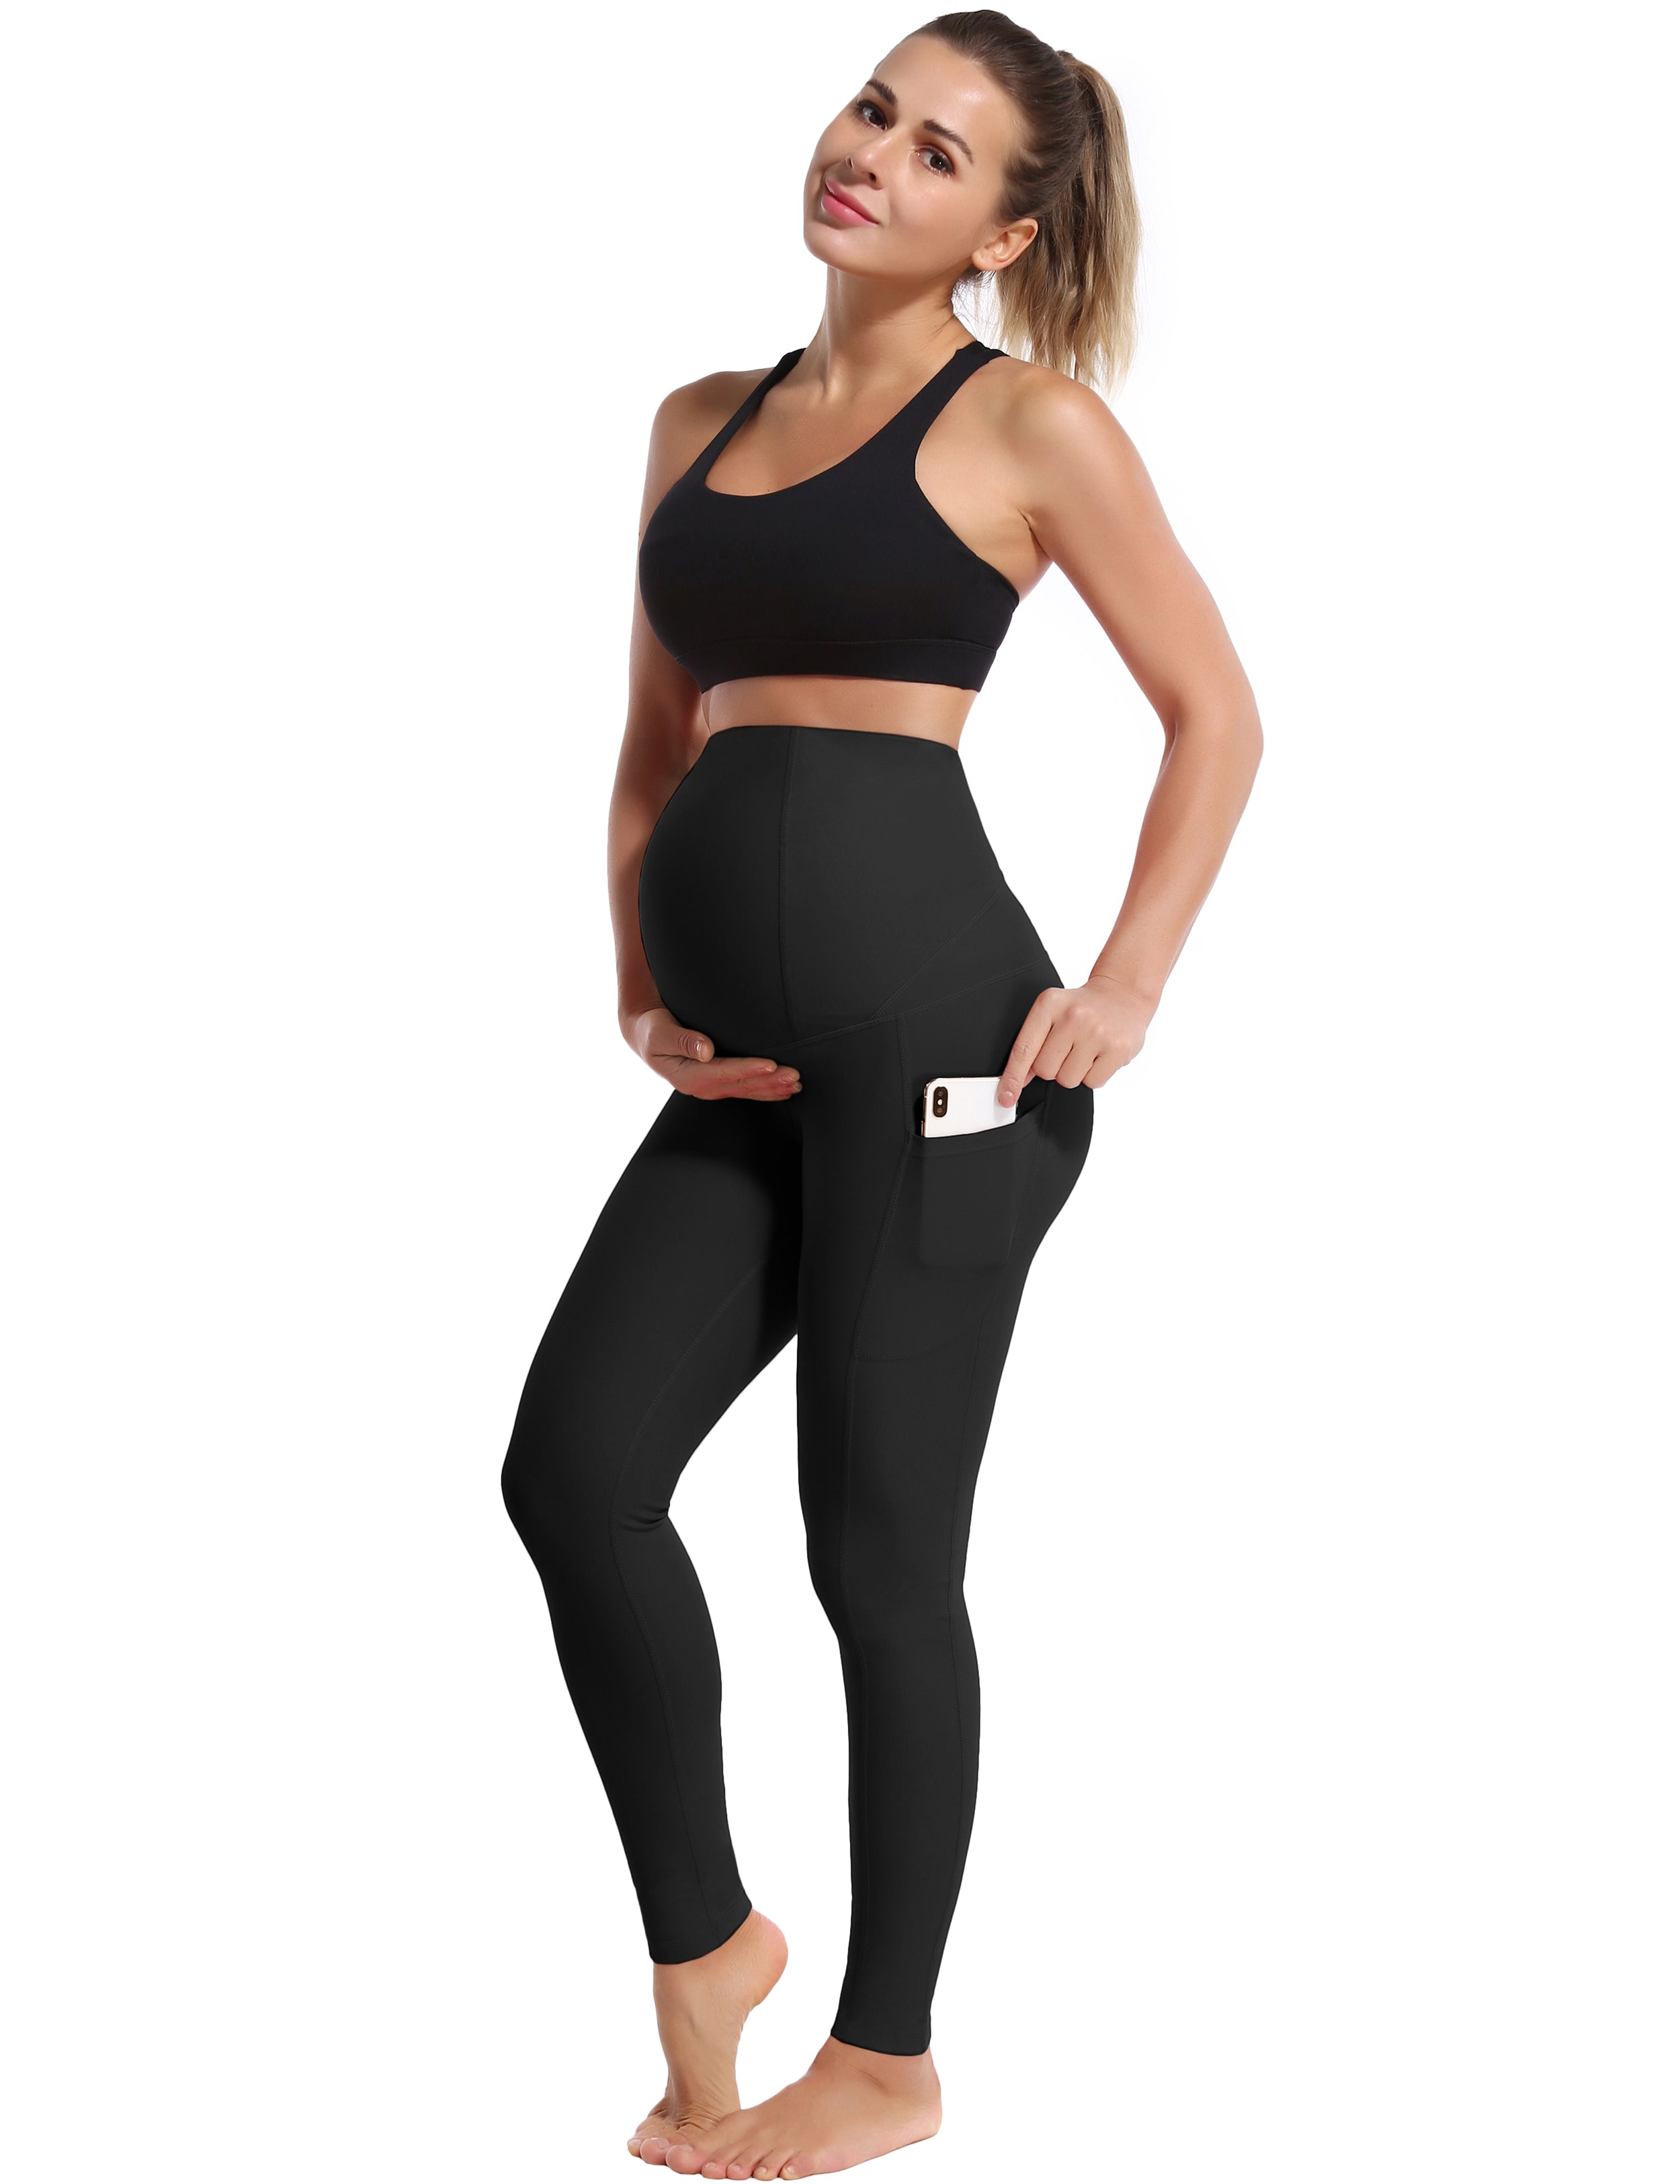 26" Side Pockets Maternity Yoga Pants black 87%Nylon/13%Spandex Softest-ever fabric High elasticity 4-way stretch Fabric doesn't attract lint easily No see-through Moisture-wicking Machine wash